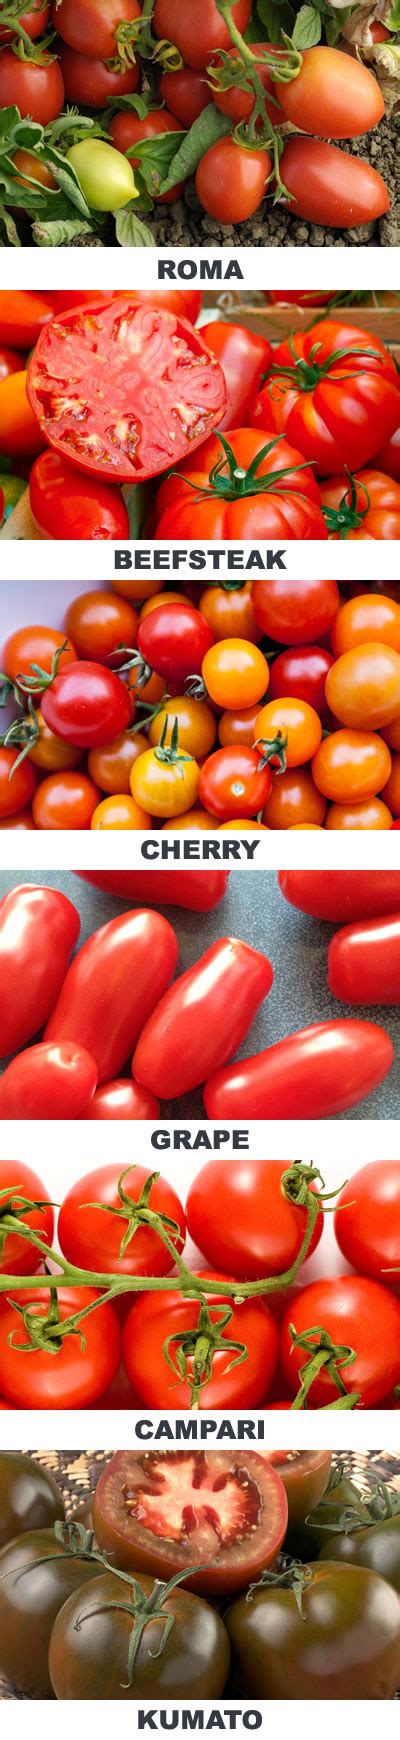 Health Benefits Of Tomatoes Nutrition Facts Recipes And More